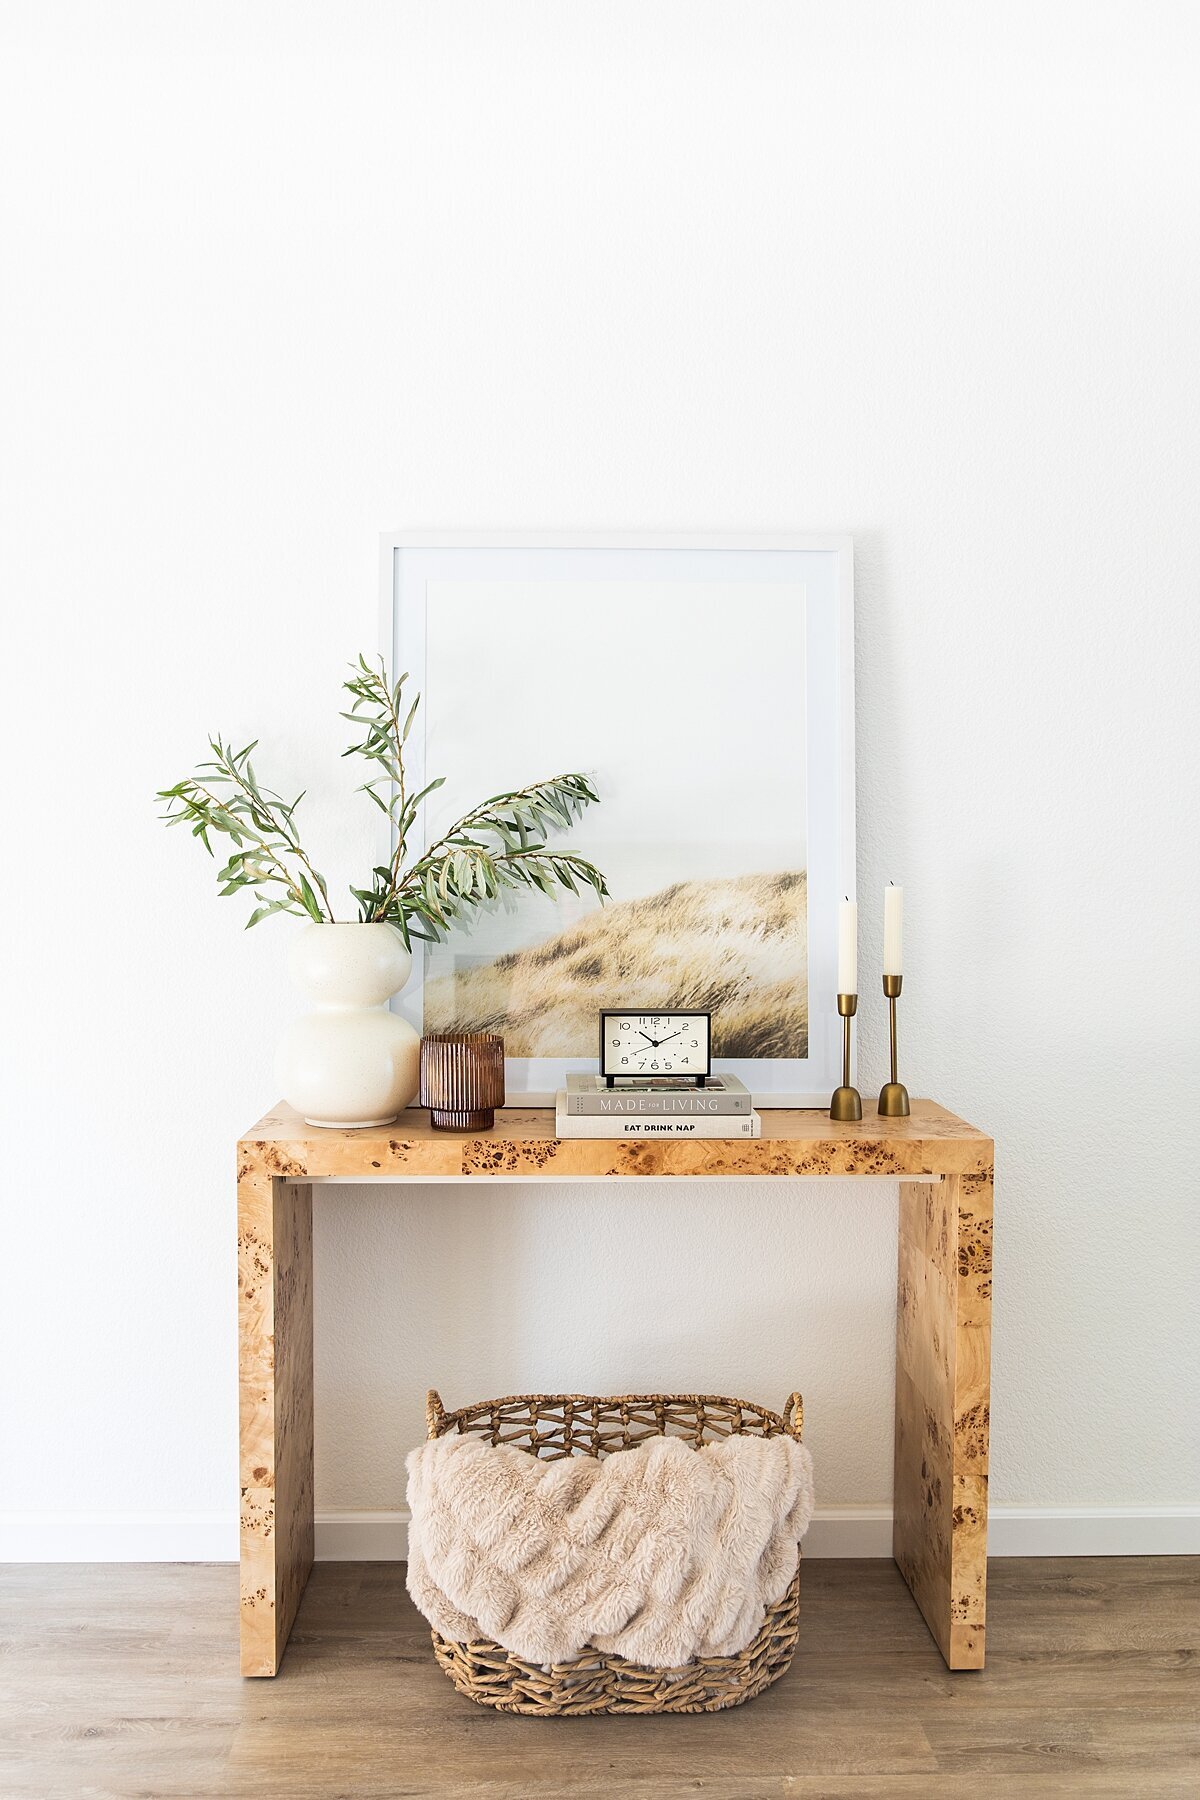 Styled console table by Natalie Barnas based in San Diego, California.